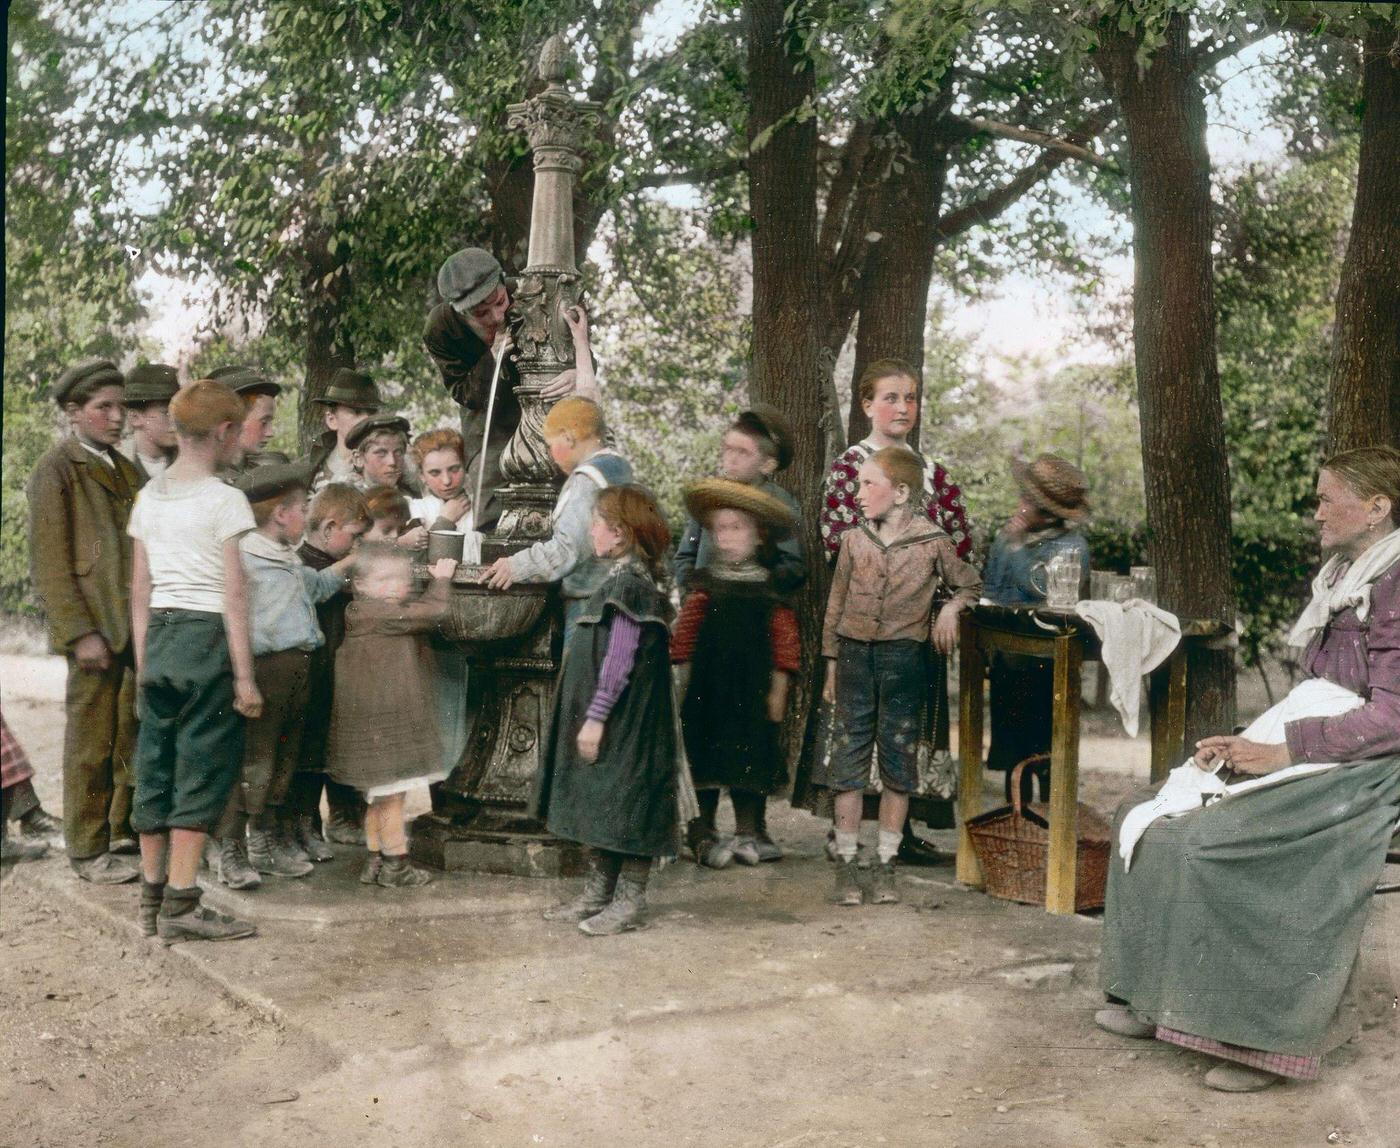 Drinking fountain at the Viennese Prater, 1905.